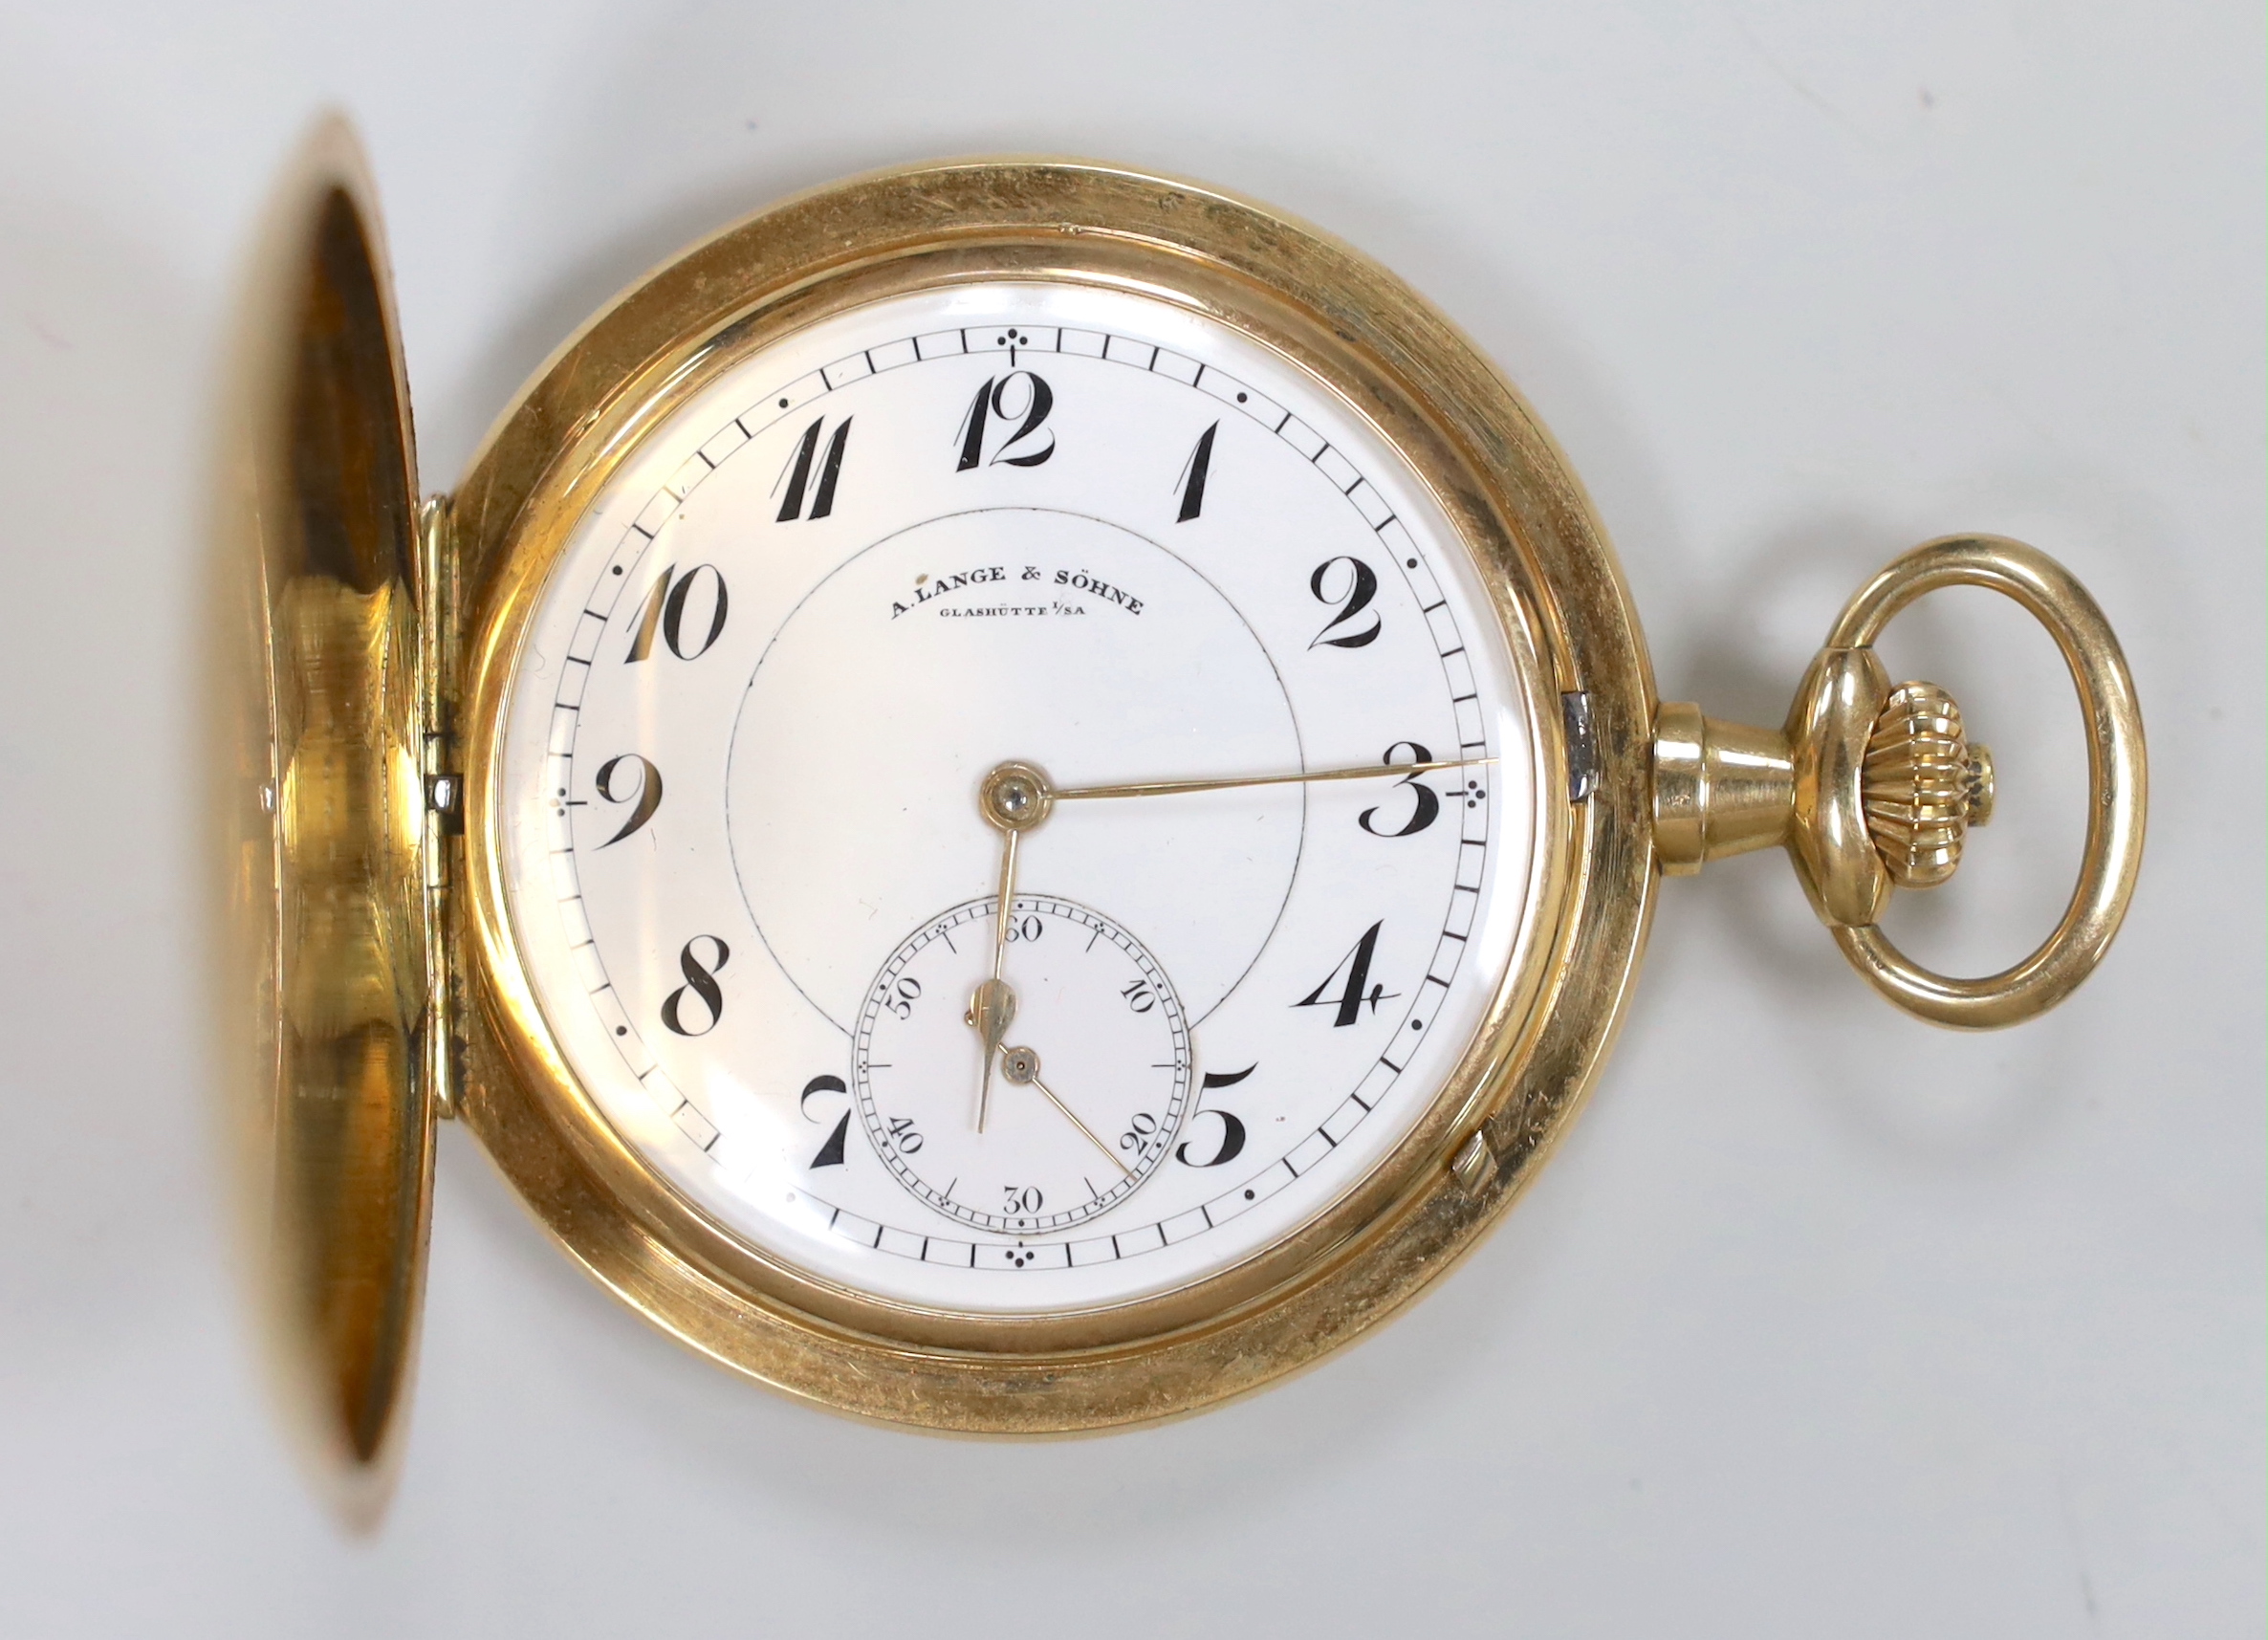 A Swiss 14k keyless hunter pocket watch by A. Lange & Sohne, with Arabic dial and subsidiary seconds, case diameter 52mm, gross weight 84 grams, with box.